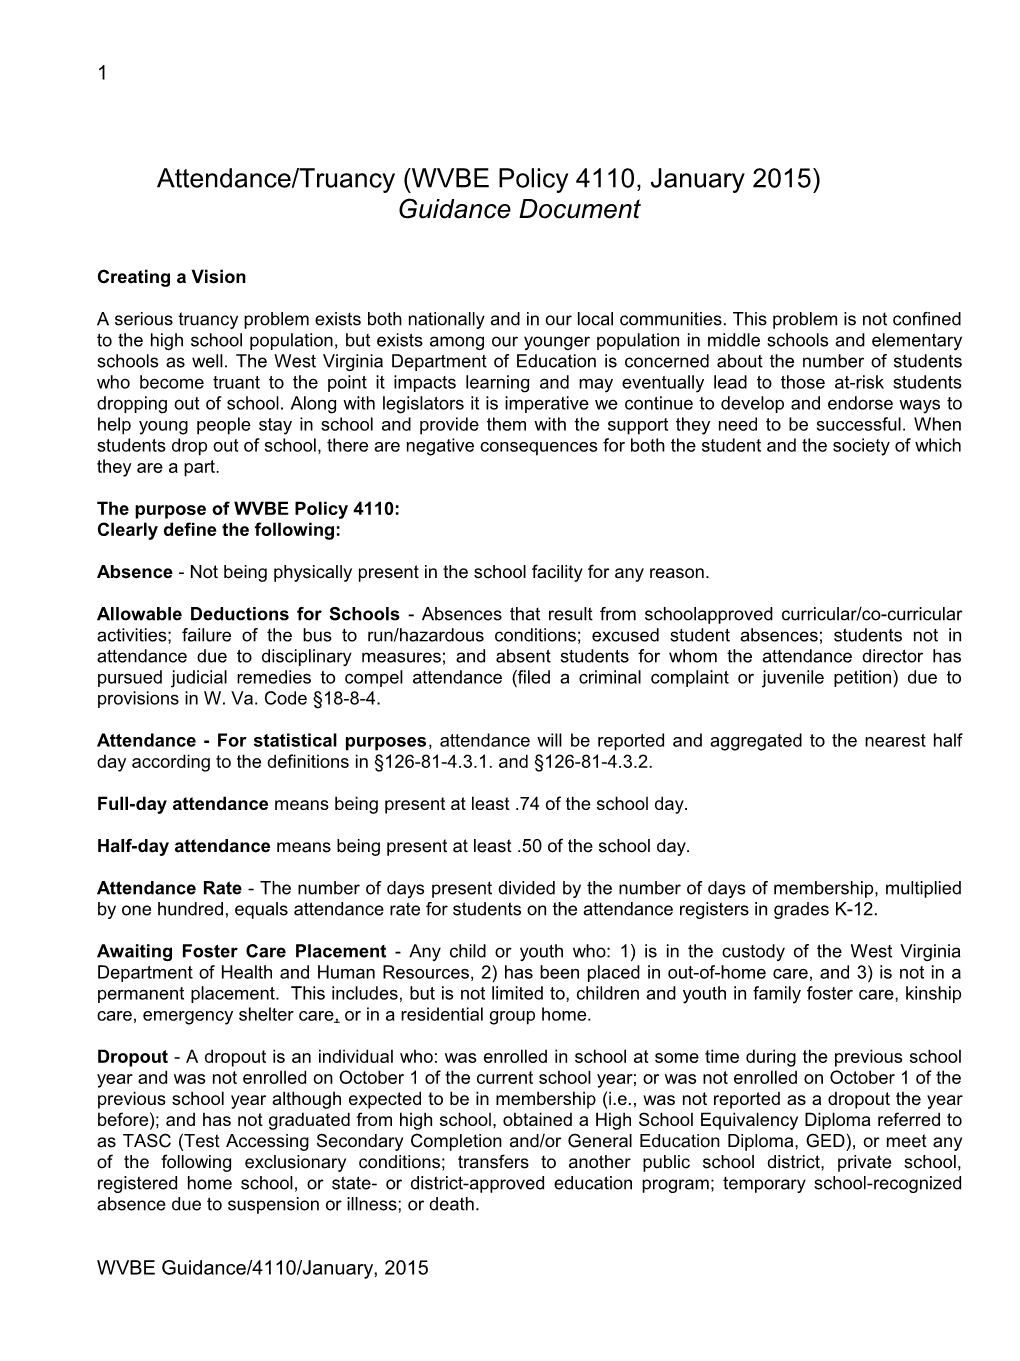 Attendance/Truancy (WVBE Policy 4110, January 2015)